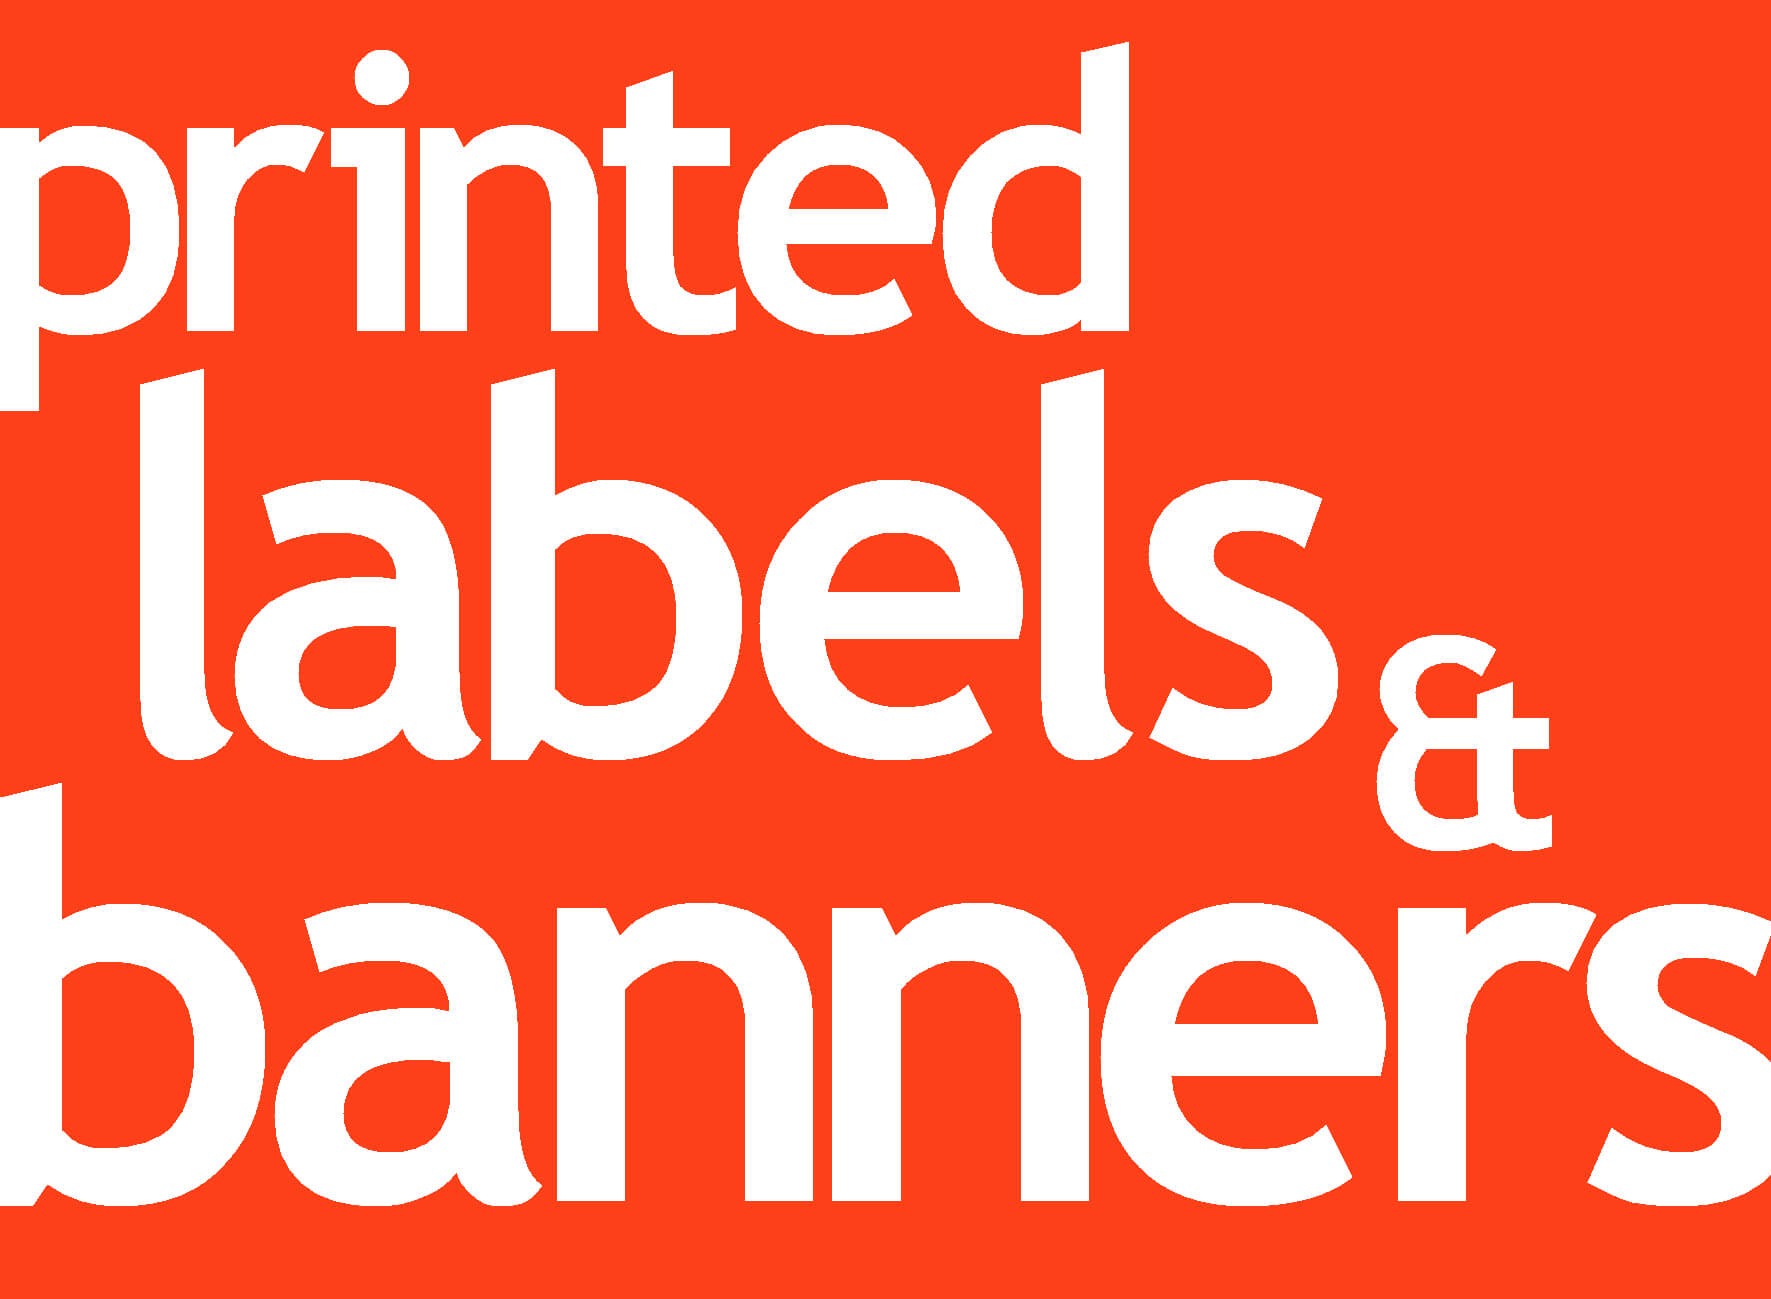 Printed Labels and banners